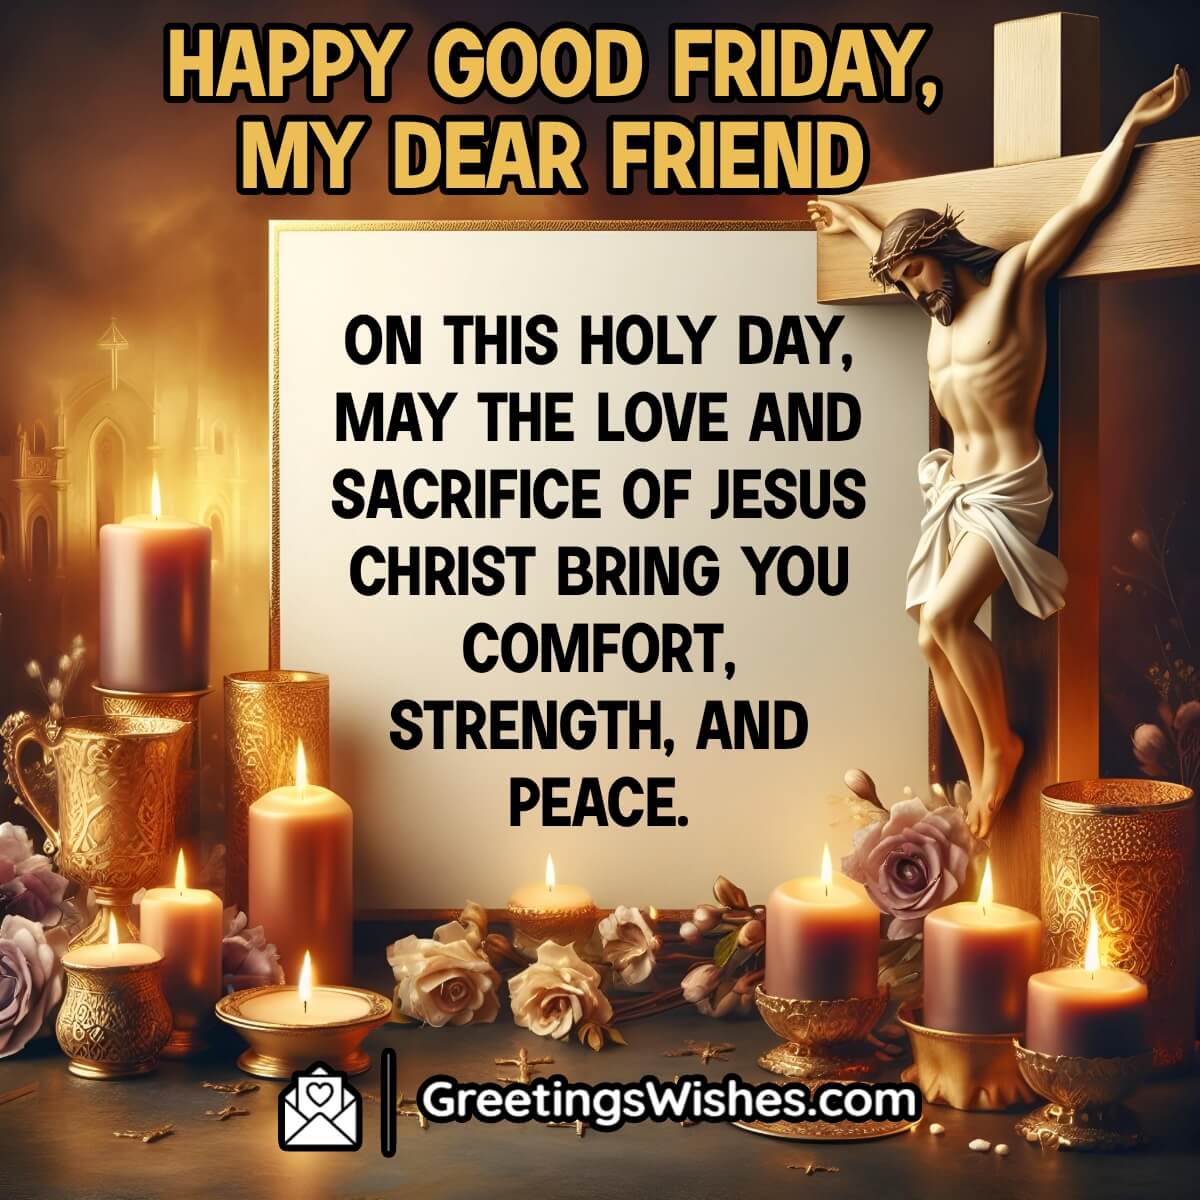 Happy Good Friday Wishes For Friends